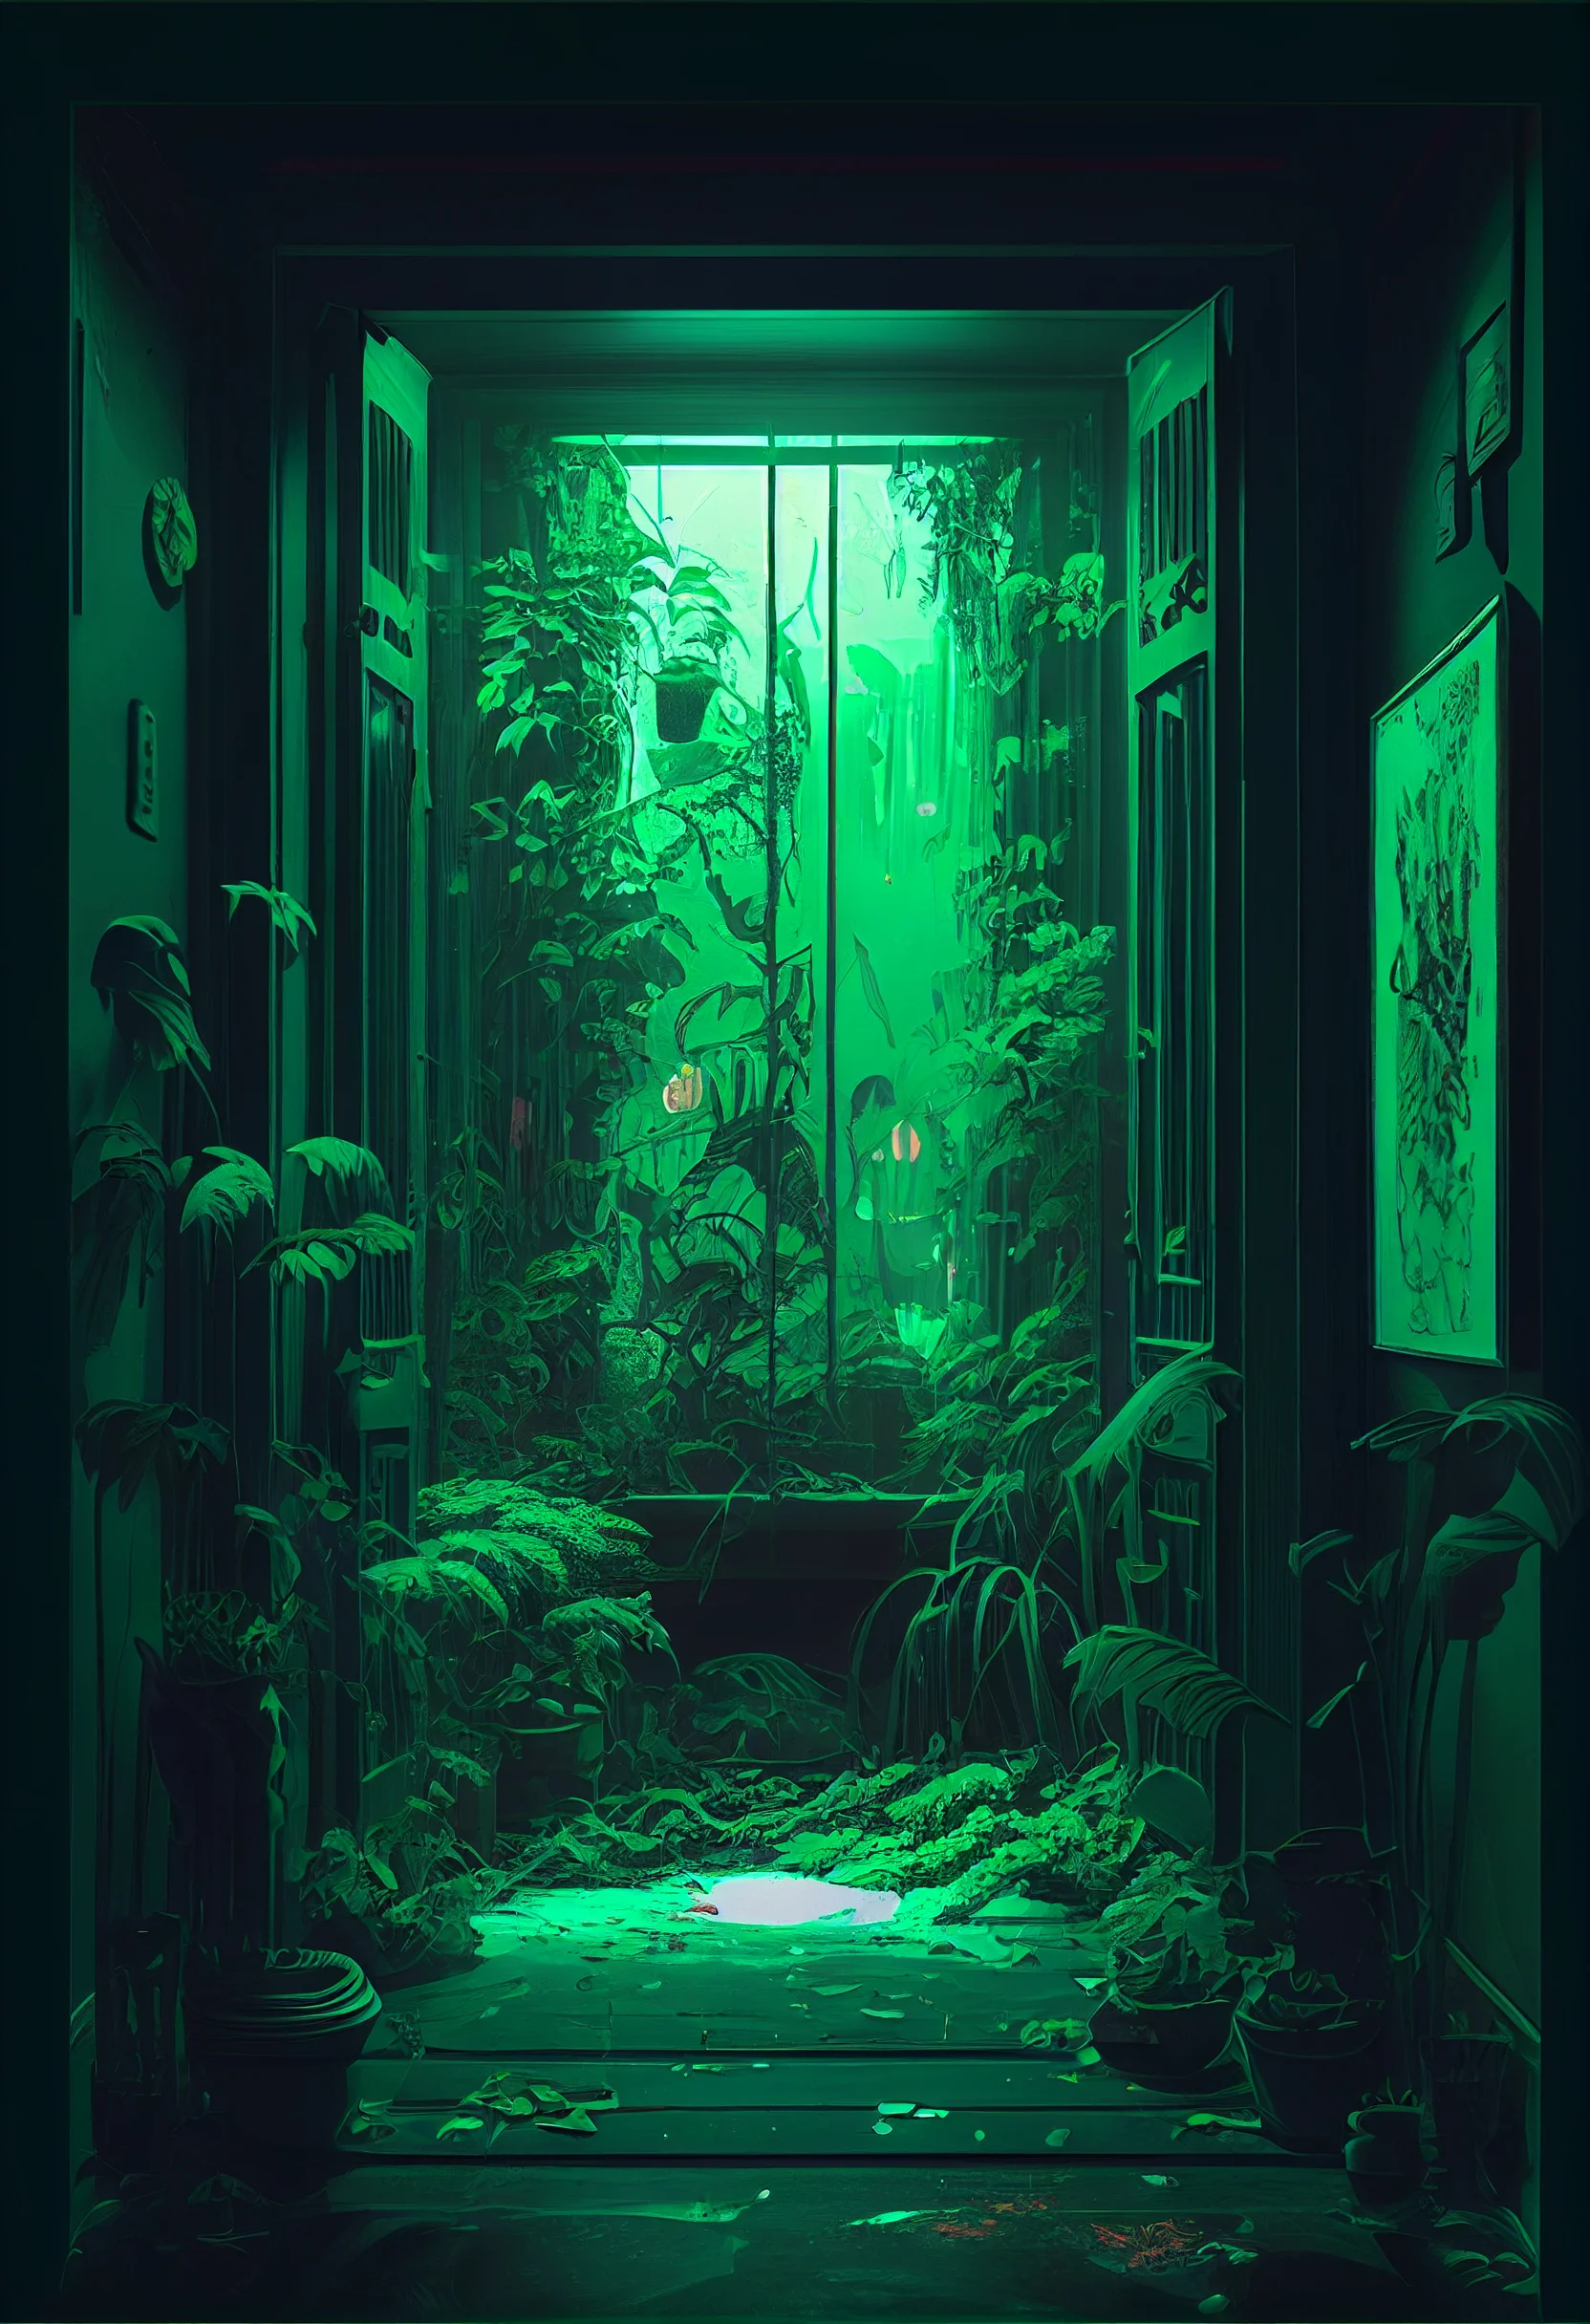 A dark room with plants and green light - Green, dark green